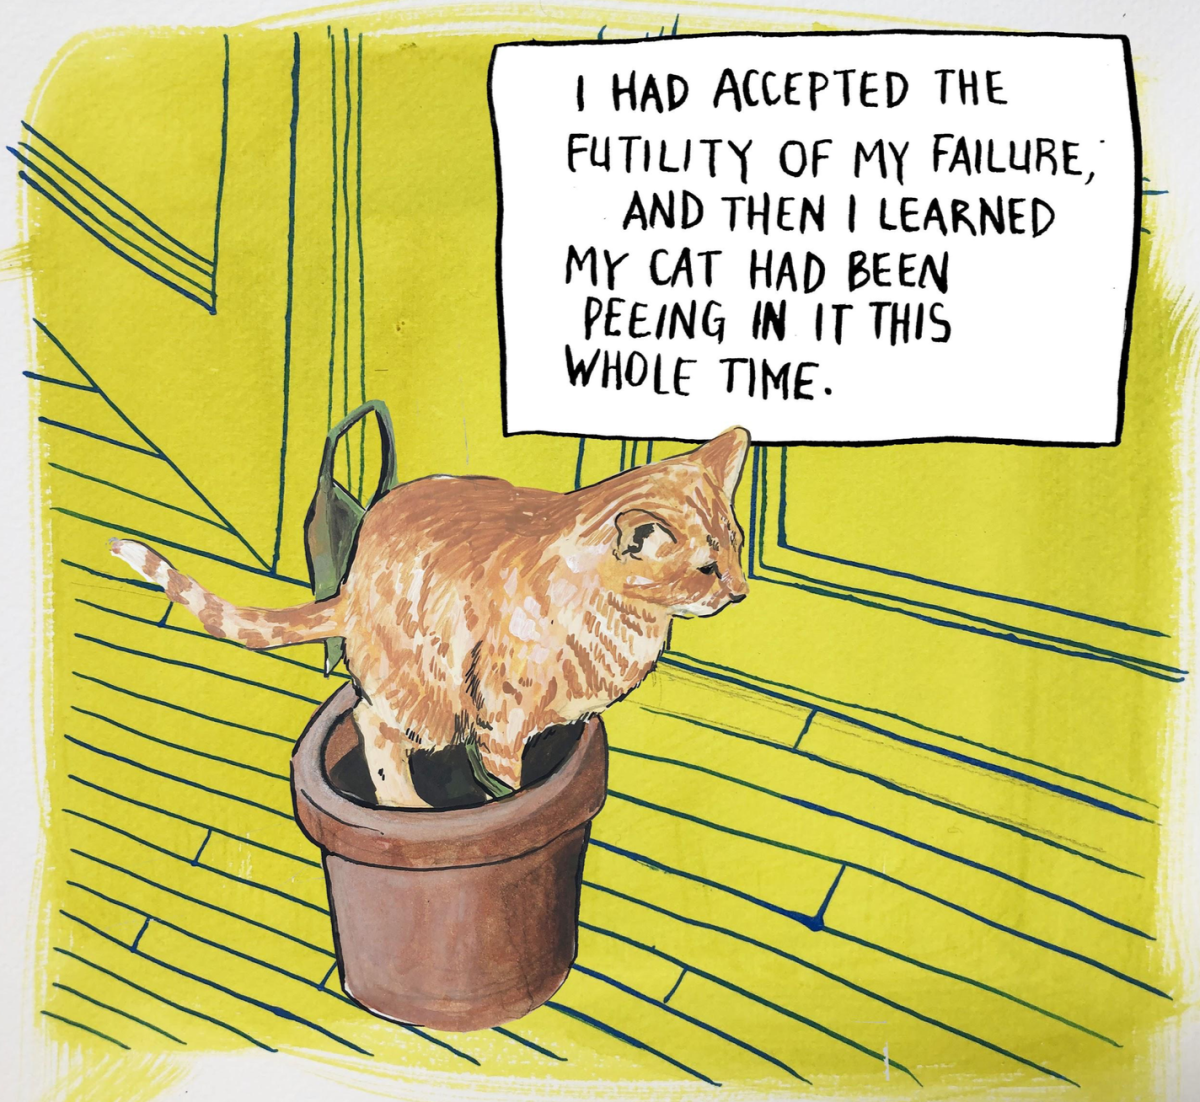 "I had accepted the futility of my failure and then I learned my cat had been peeing in it this whole time."